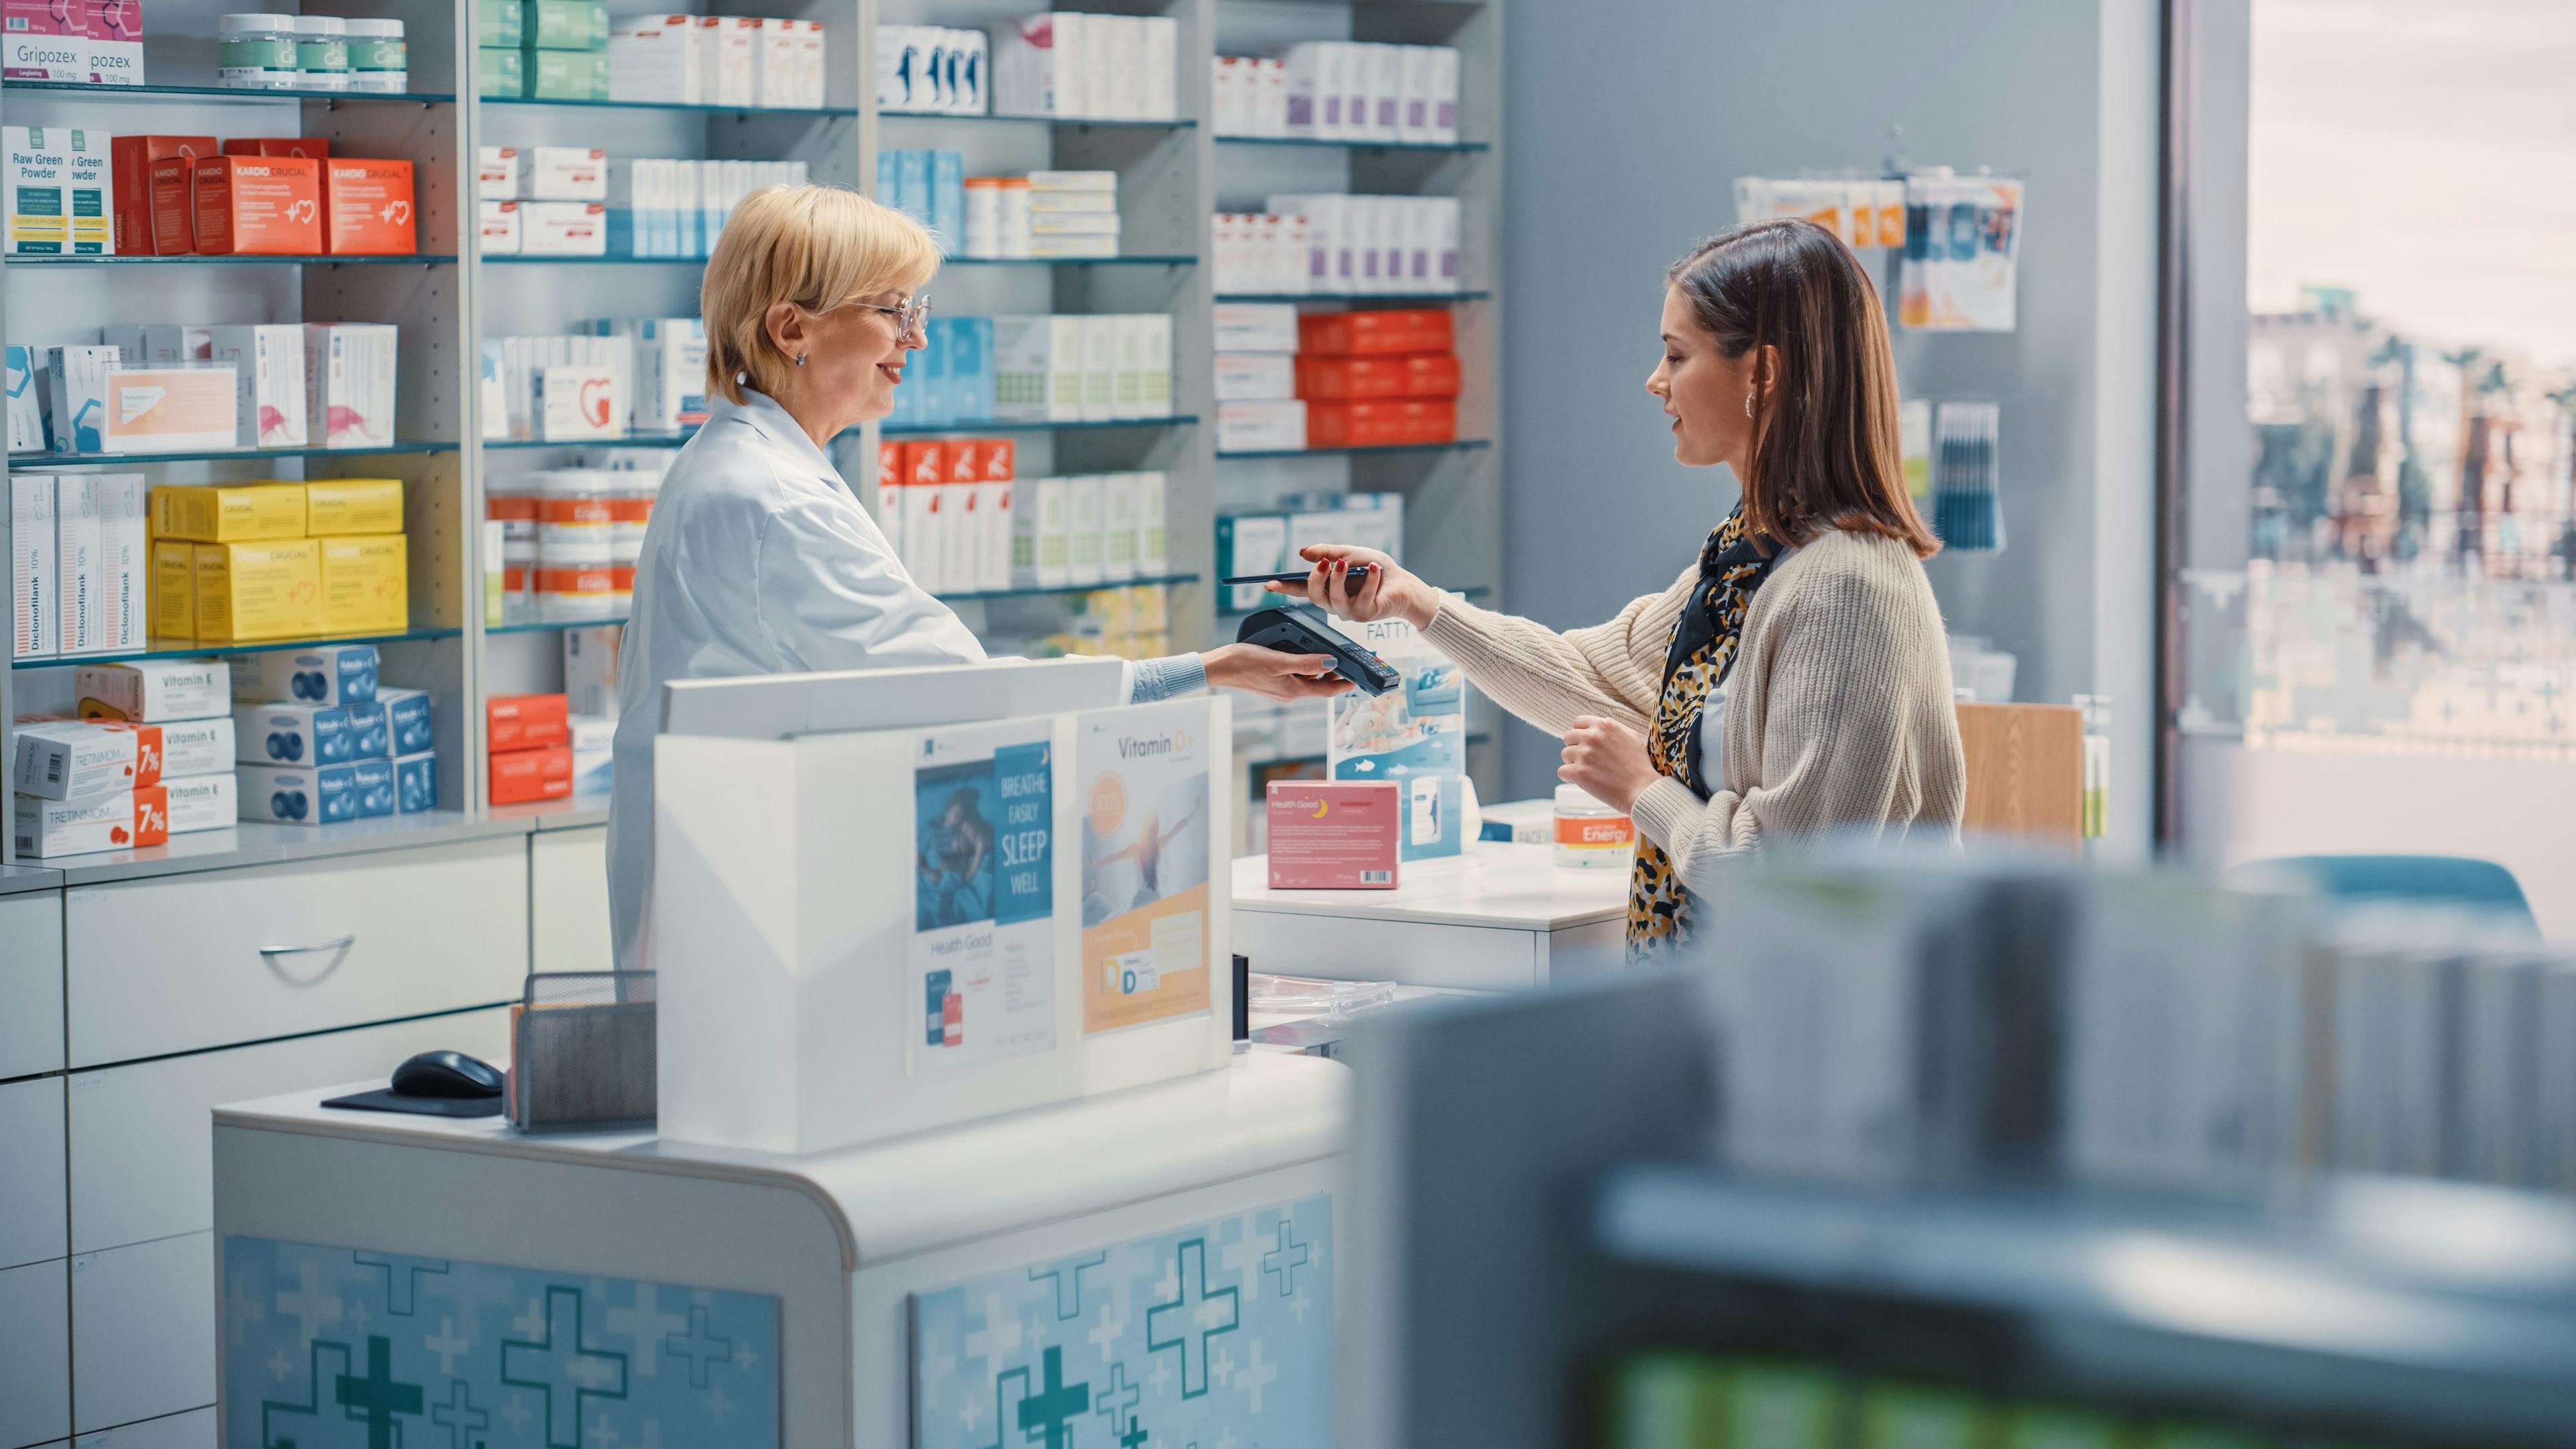 Pharmacists Enhance Patient Care Through Medication Titration and Lifestyle Support